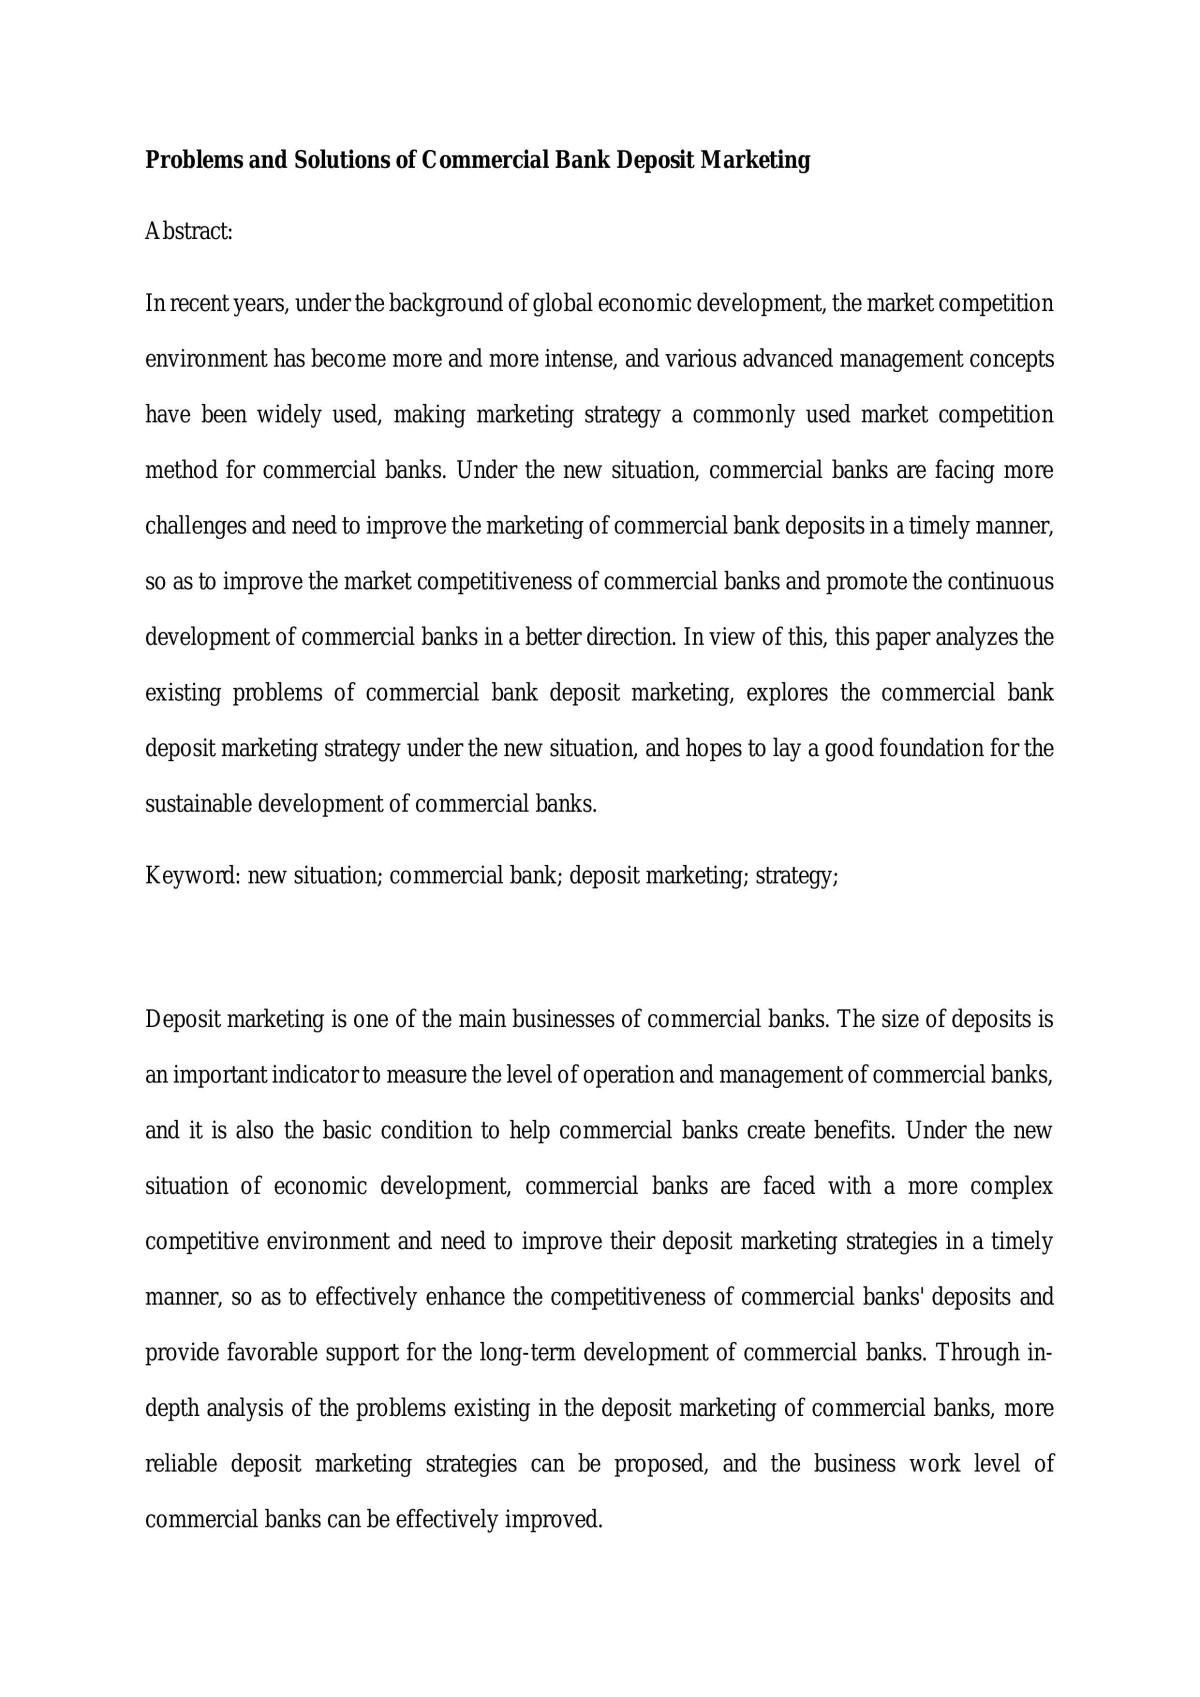 Marketing of Financial Services Essay (Problems and Solutions of Commercial Bank Deposit Marketing) - Page 1